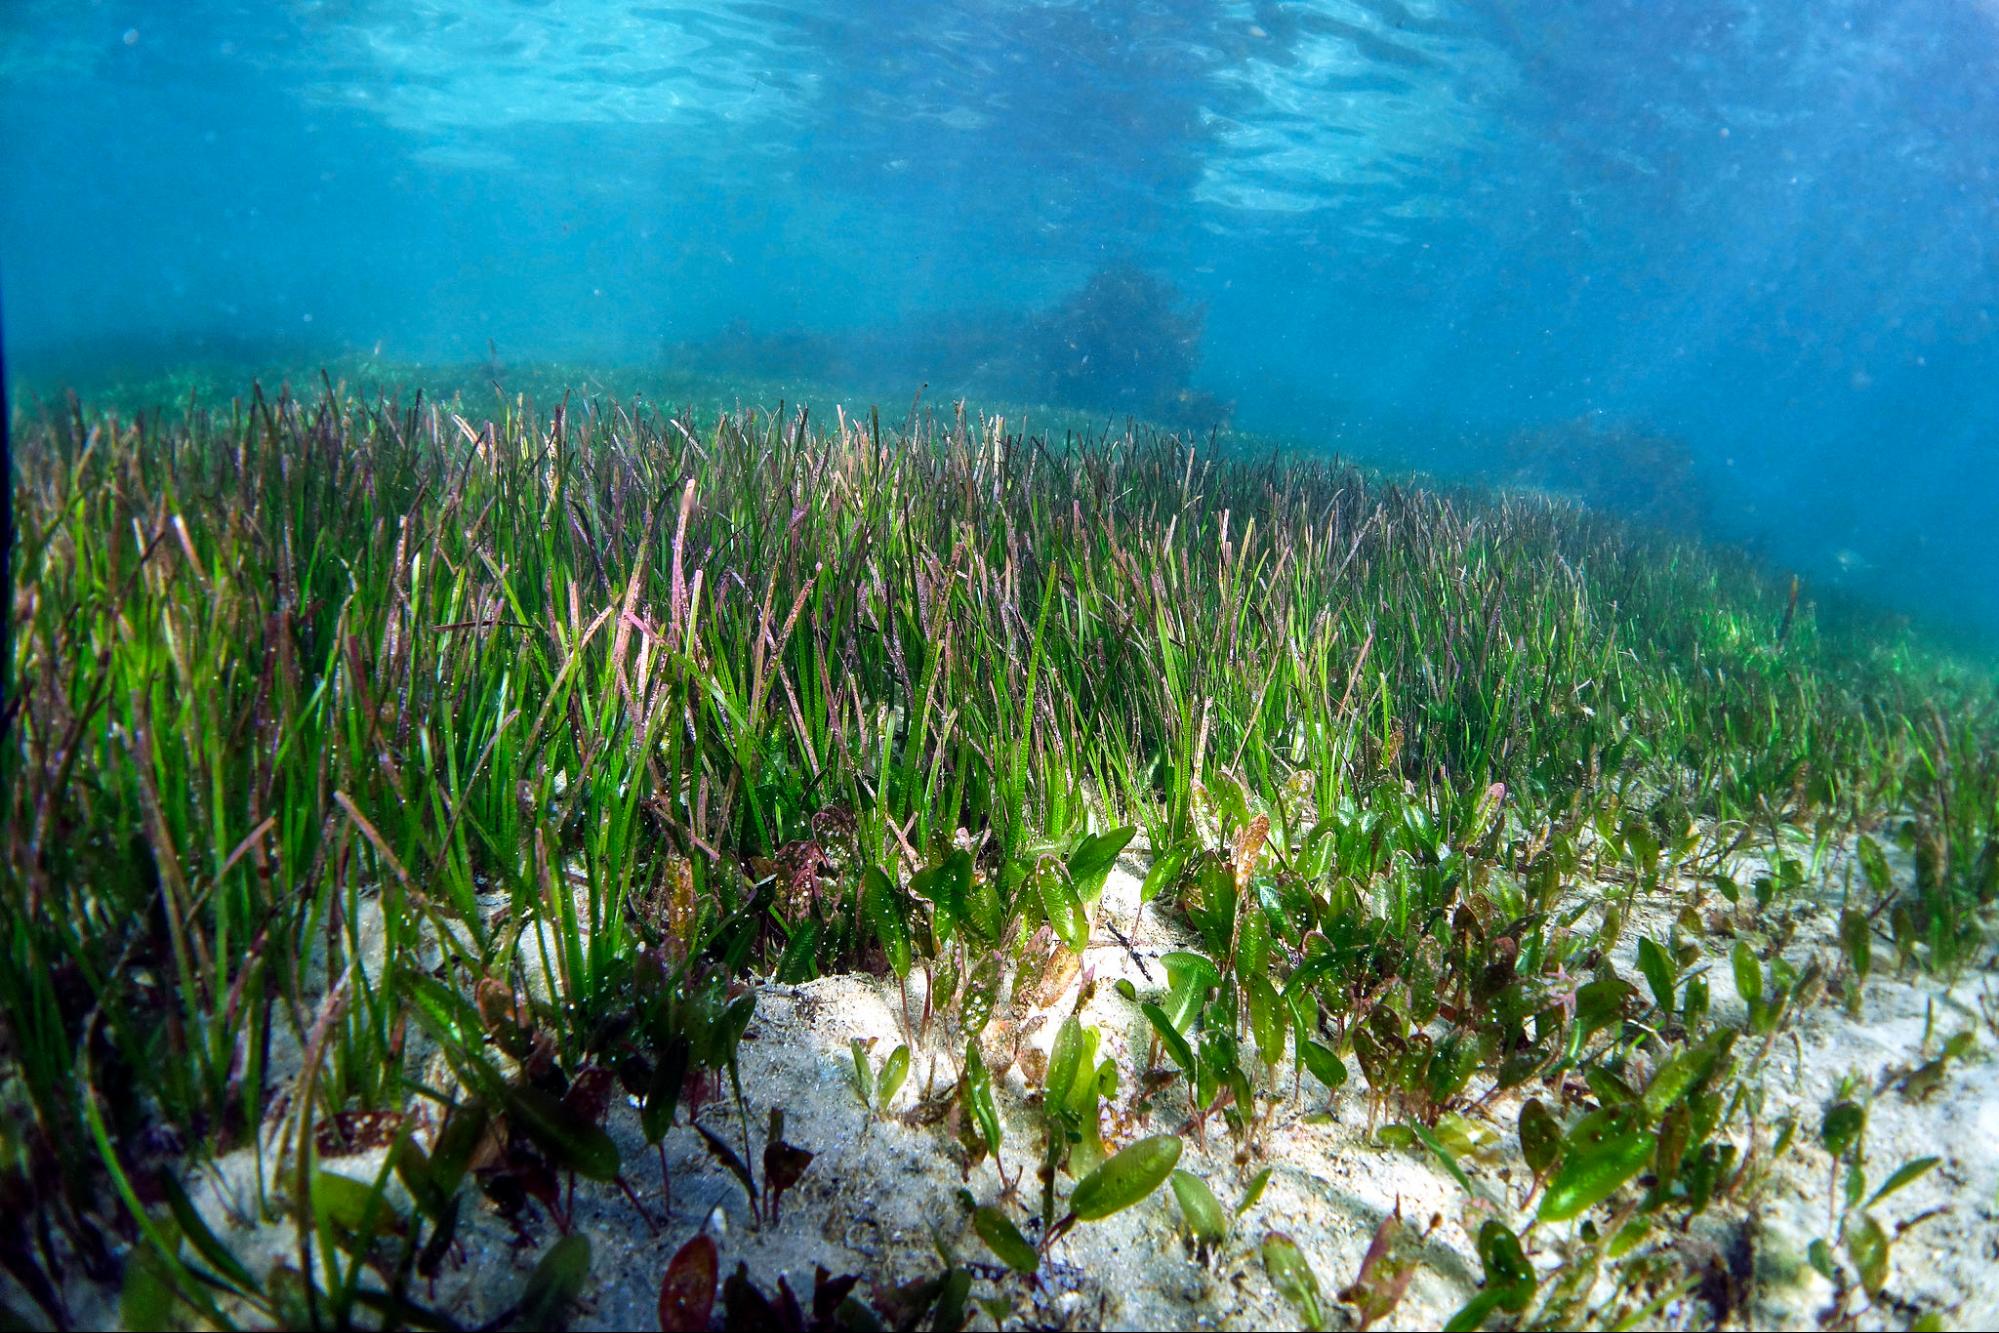 World’s Largest Plant Is a Vast Seagrass Meadow in Australia